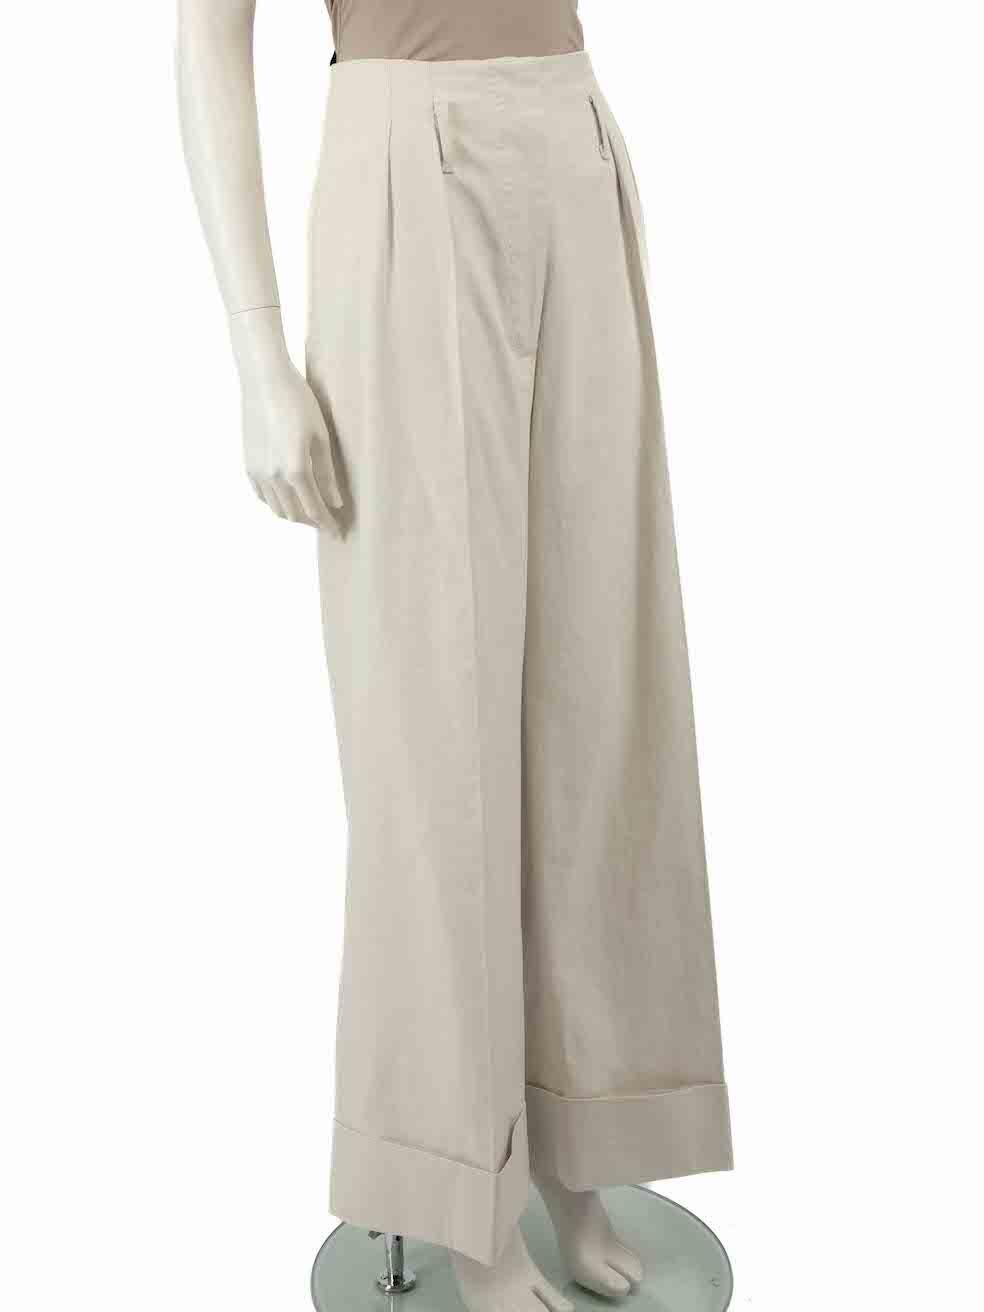 CONDITION is Very good. Hardly any visible wear to trousers is evident on this used Stella McCartney designer resale item.
 
 
 
 Details
 
 
 Beige
 
 Cotton
 
 Trousers
 
 Wide leg
 
 High rise
 
 2x Side pockets
 
 1x Back pocket
 
 Fly zip, hook